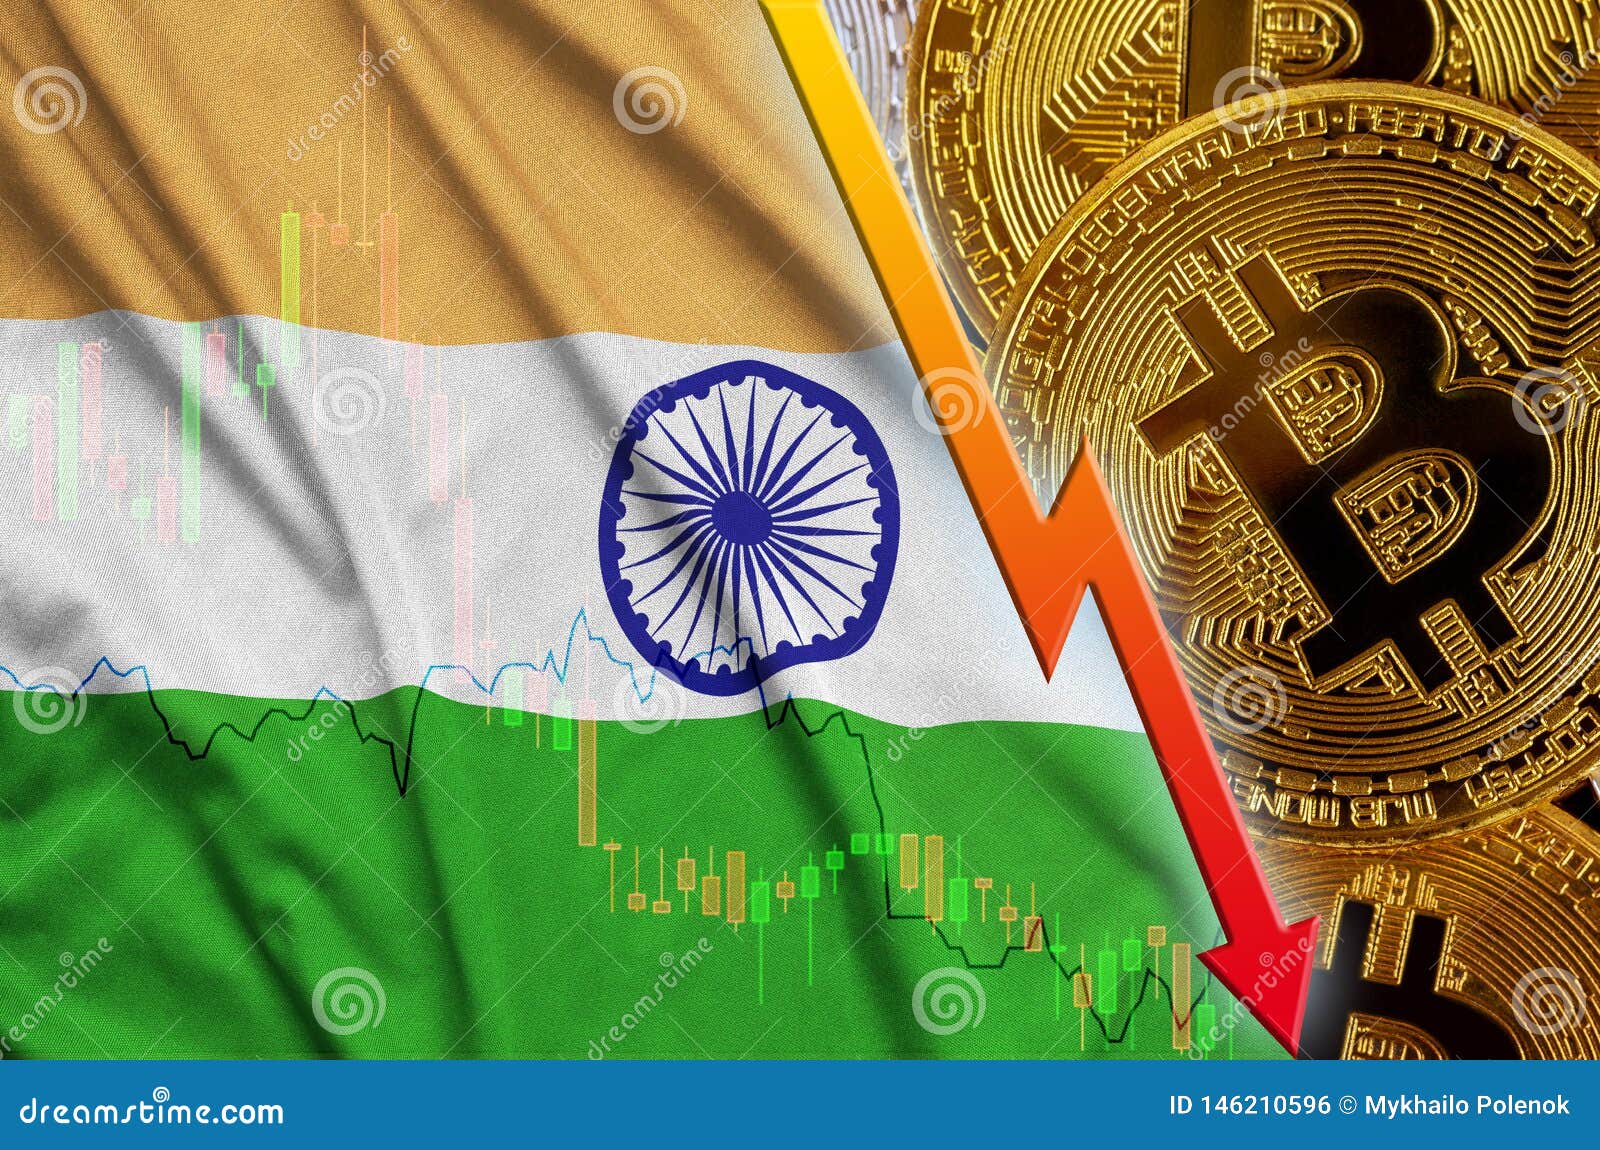 India Flag And Cryptocurrency Falling Trend With Many ...